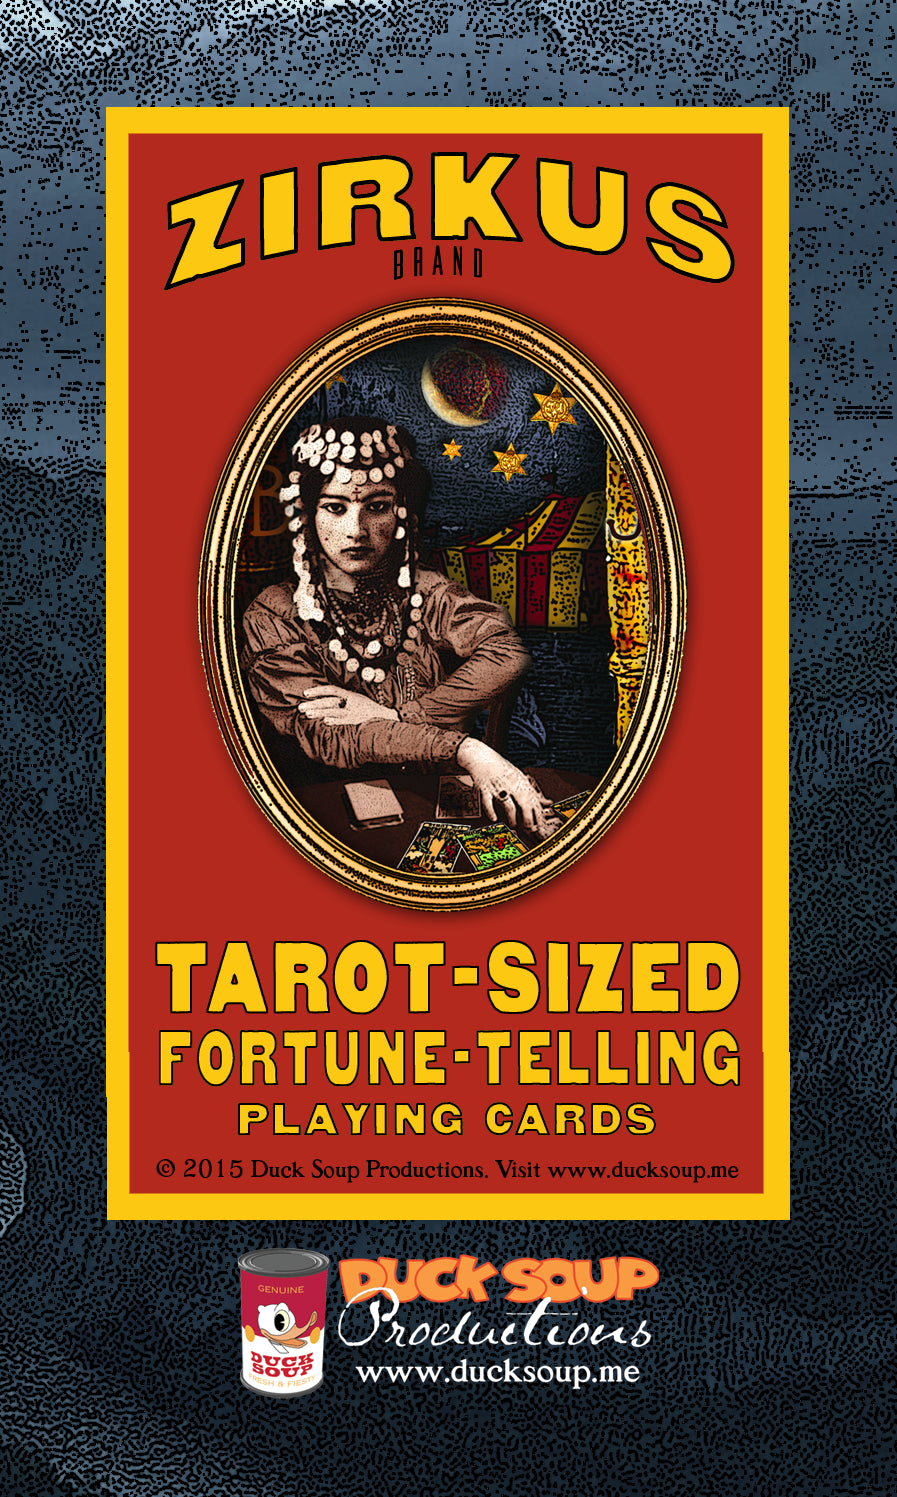 ZIRKUS brand Fortune Telling Playing Cards